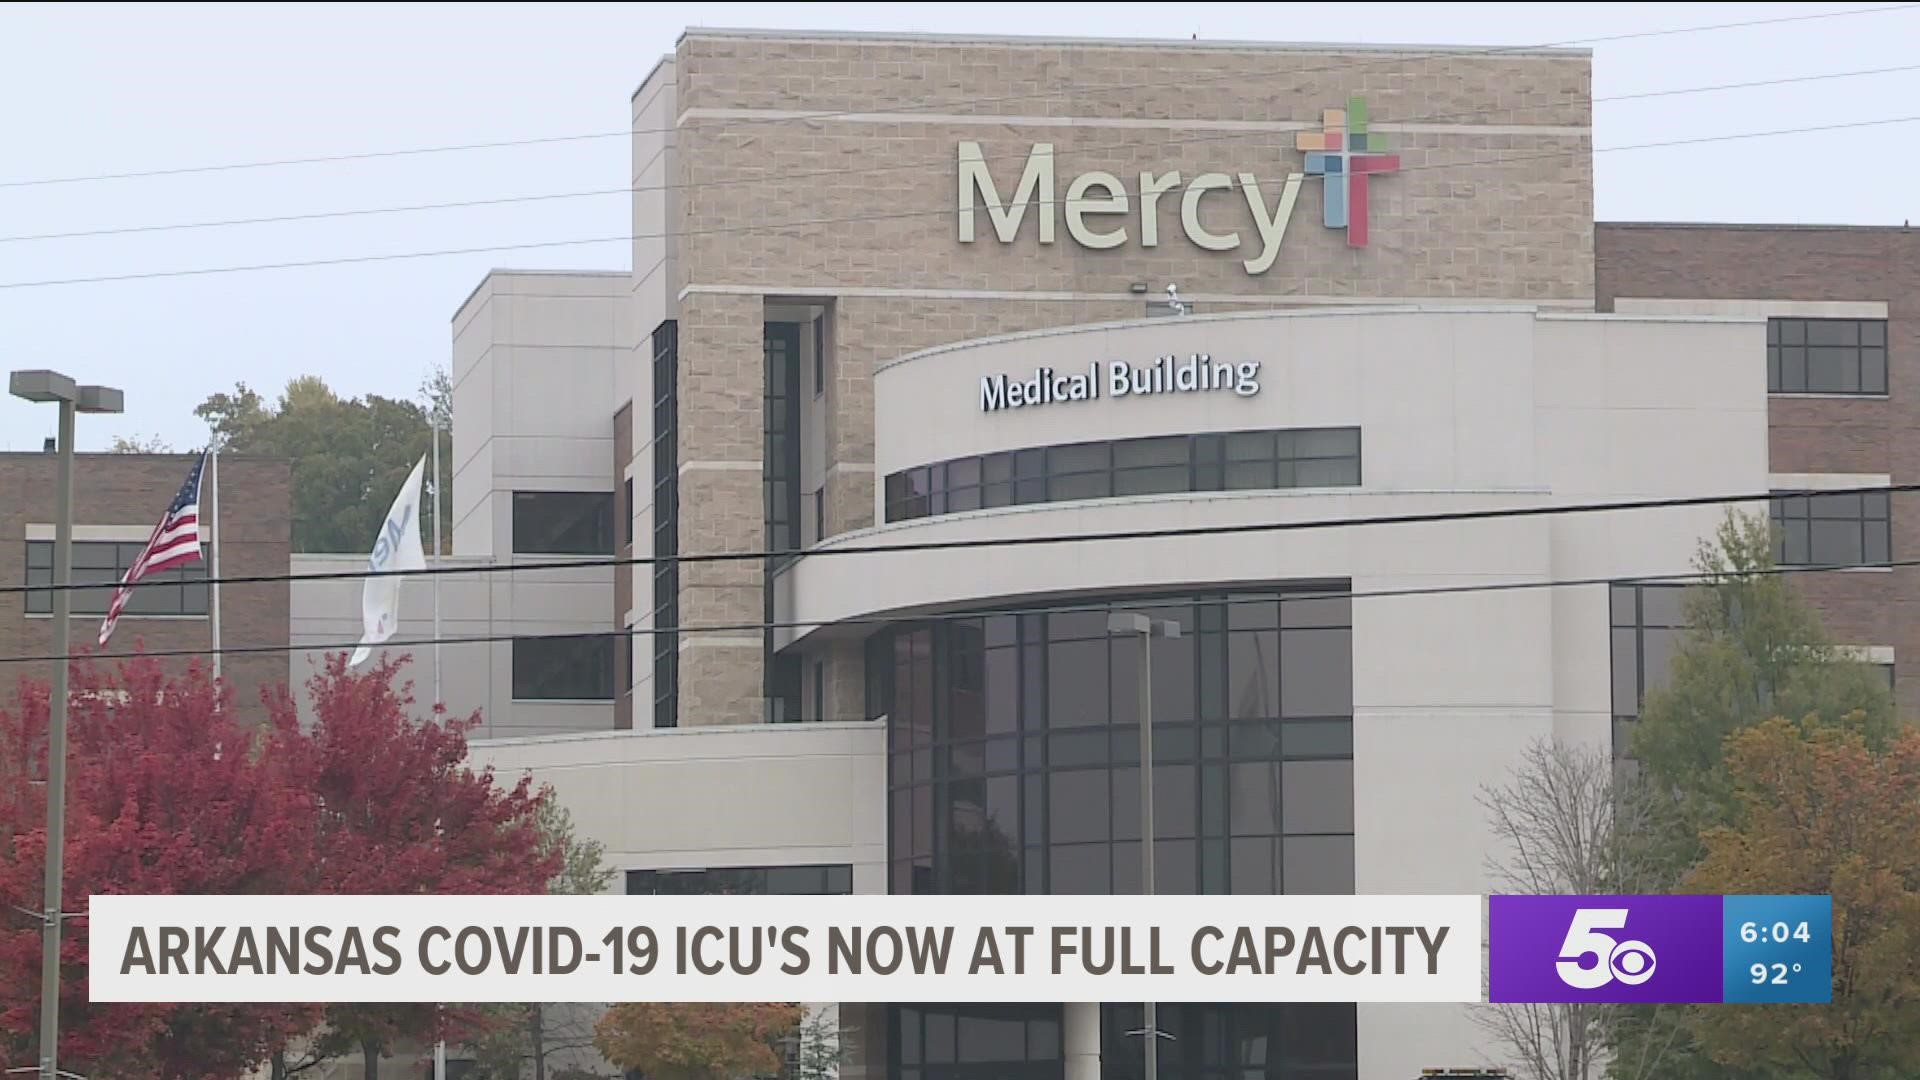 Gov. Hutchinson says as of right now, all ICU beds that were allotted for COVID-19 patients are full across Arkansas.